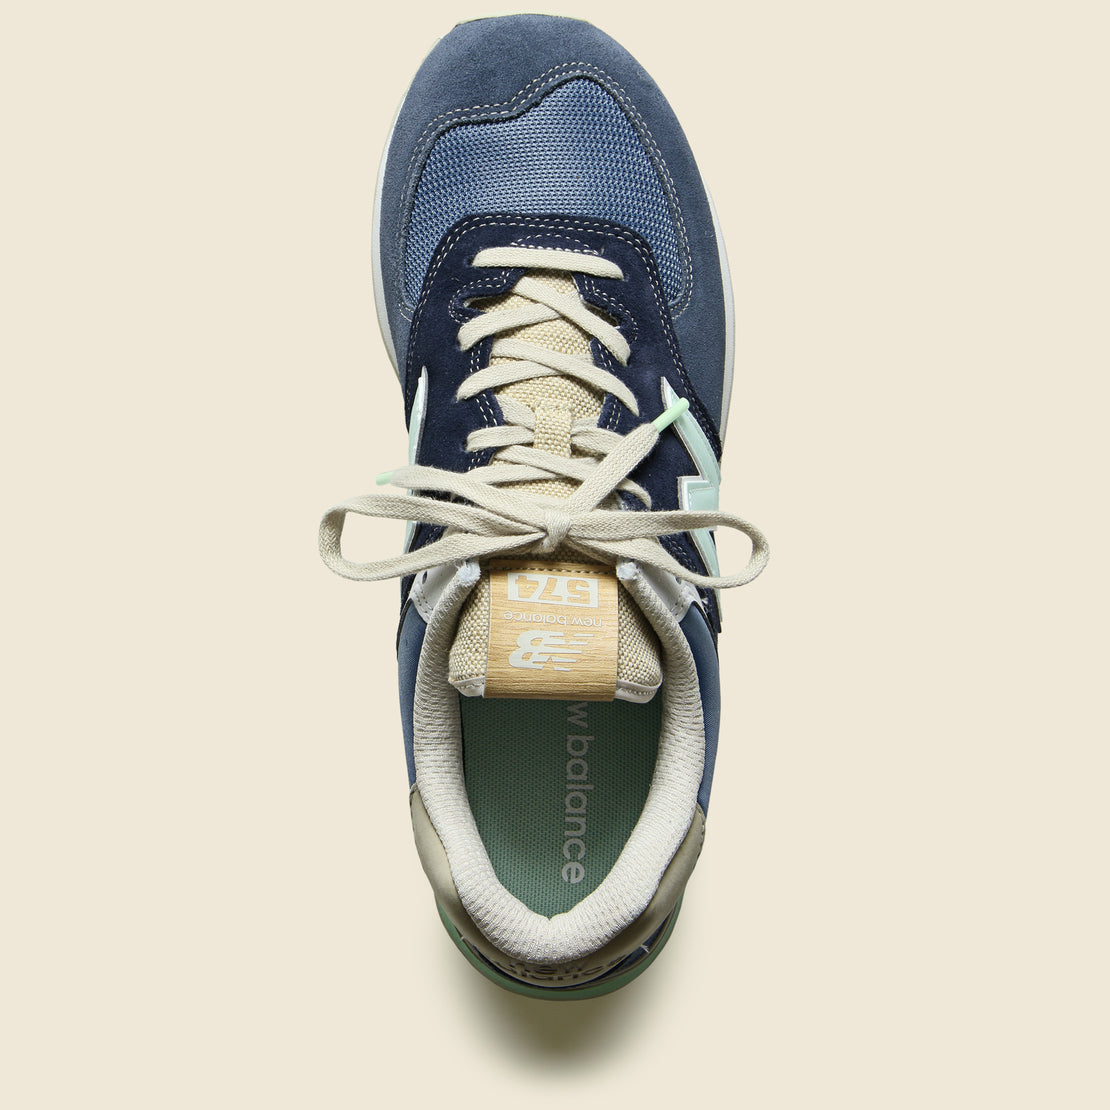 Retro Surf 574 Sneaker - Navy/Indigo - New Balance - STAG Provisions - Shoes - Athletic